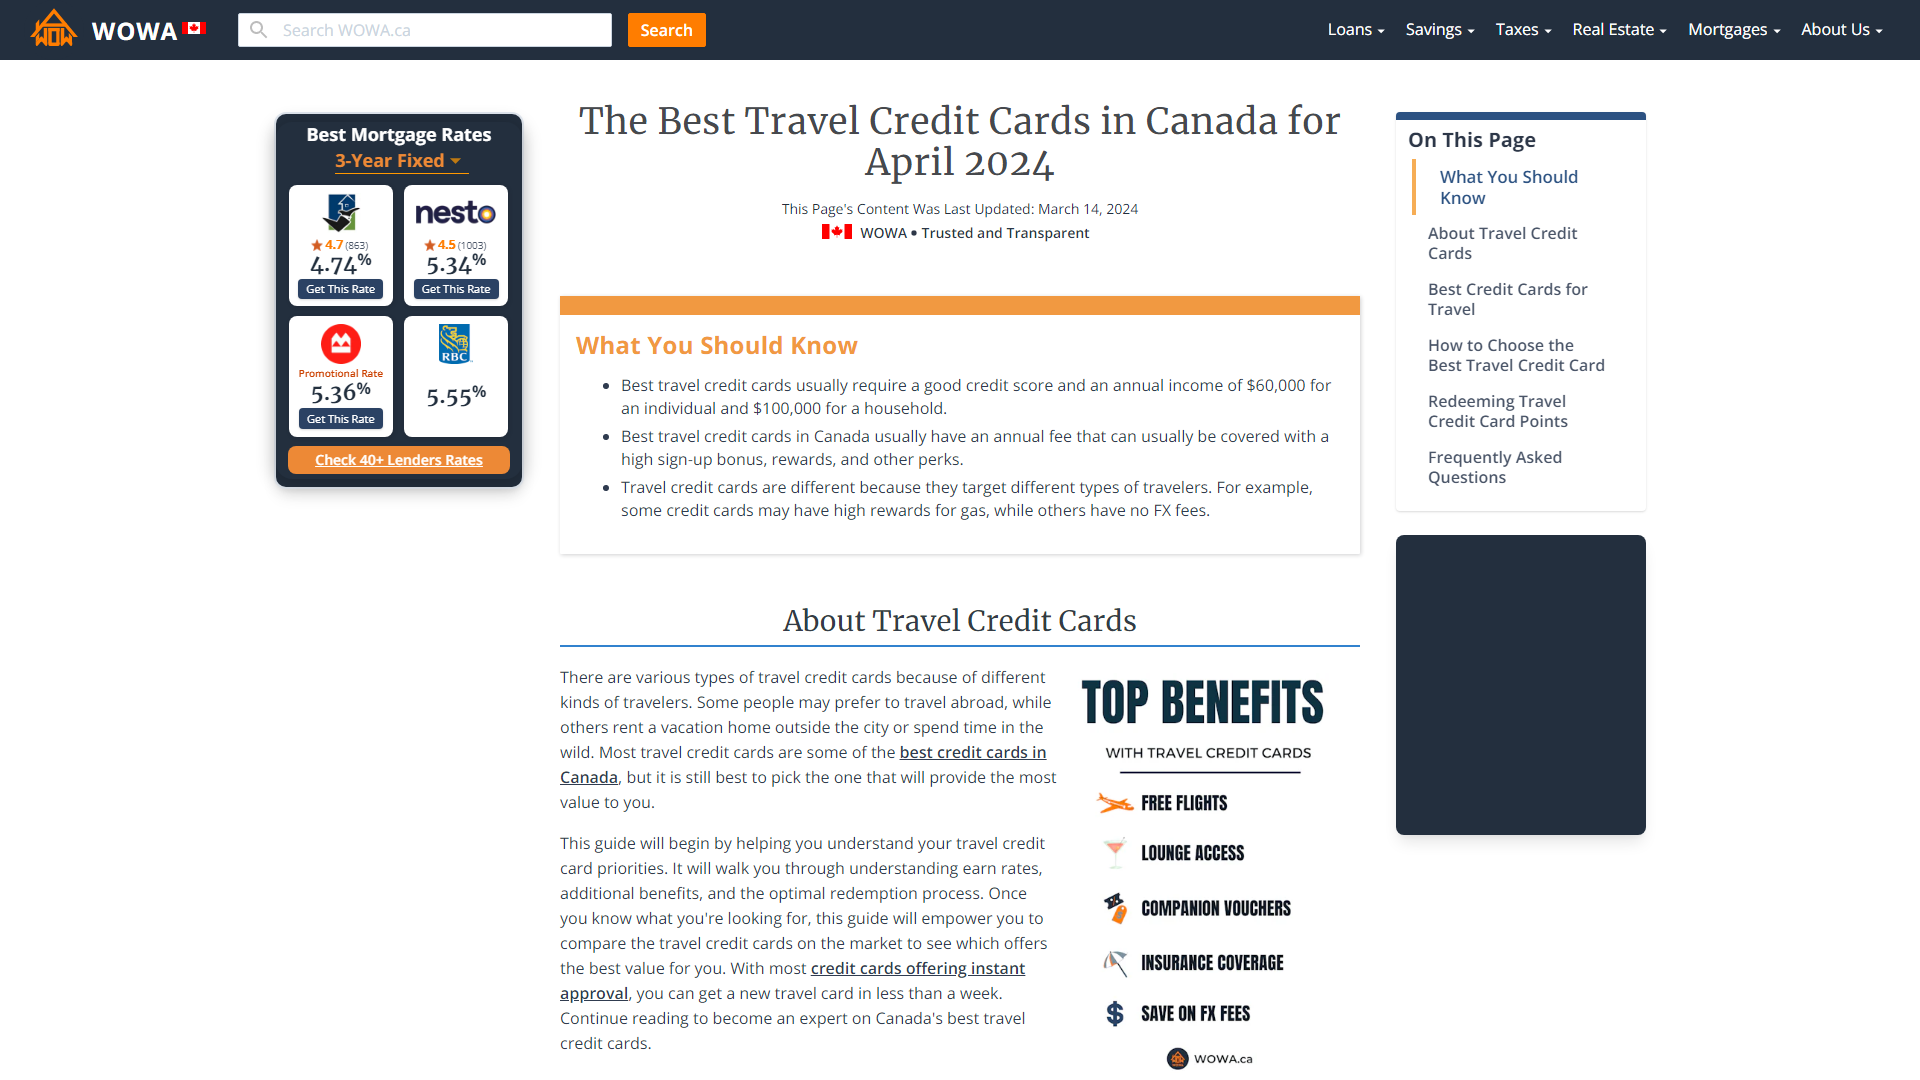 Best Travel Credit Cards in Canada for May 2024 WOWA.ca